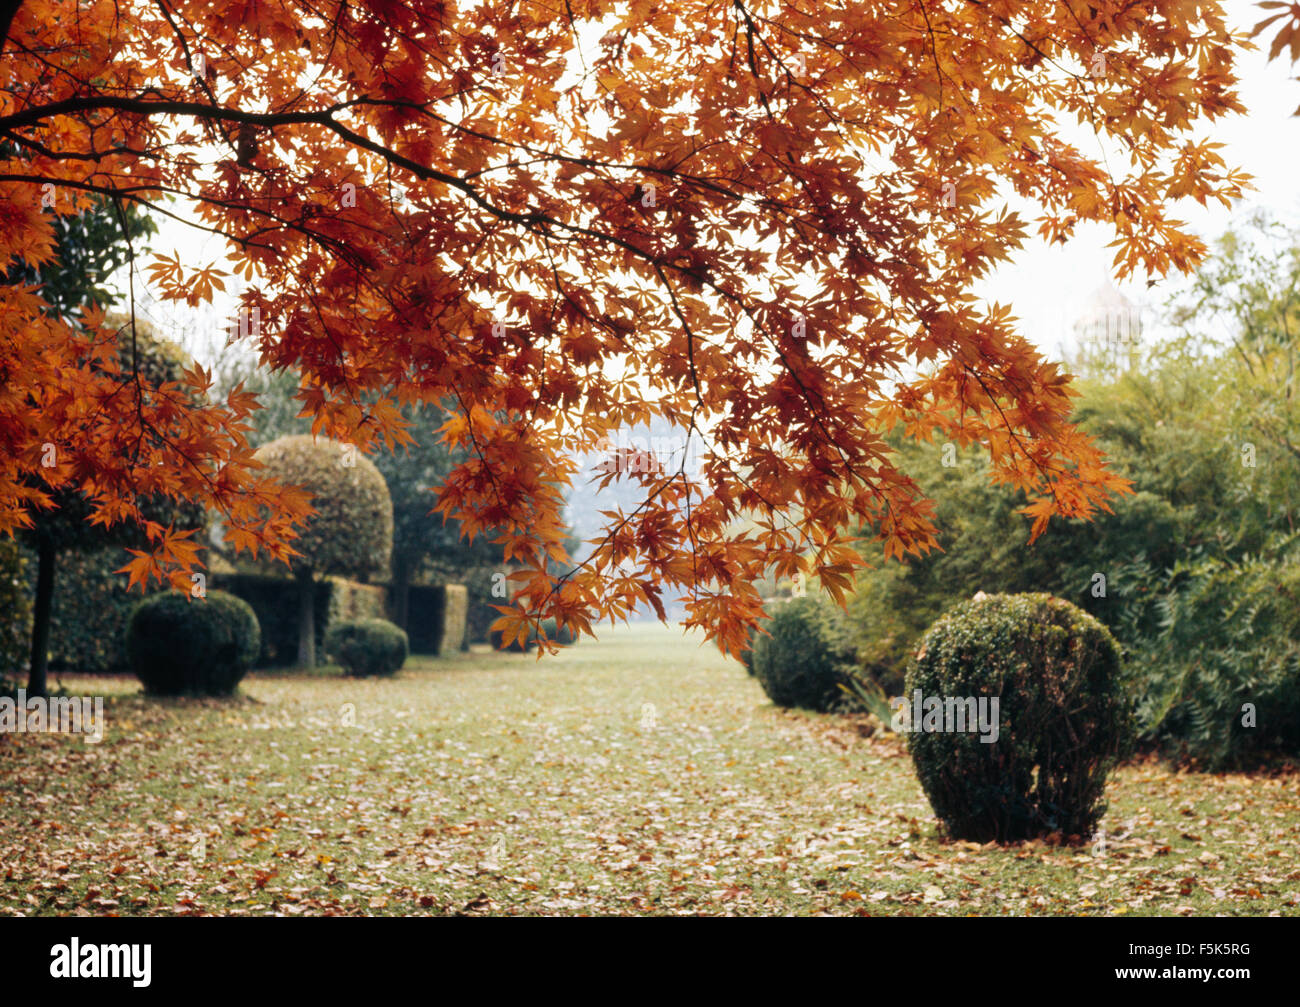 Clipped shrubs in avenue in large country garden in Autumn seen through the leaves of an acer tree Stock Photo